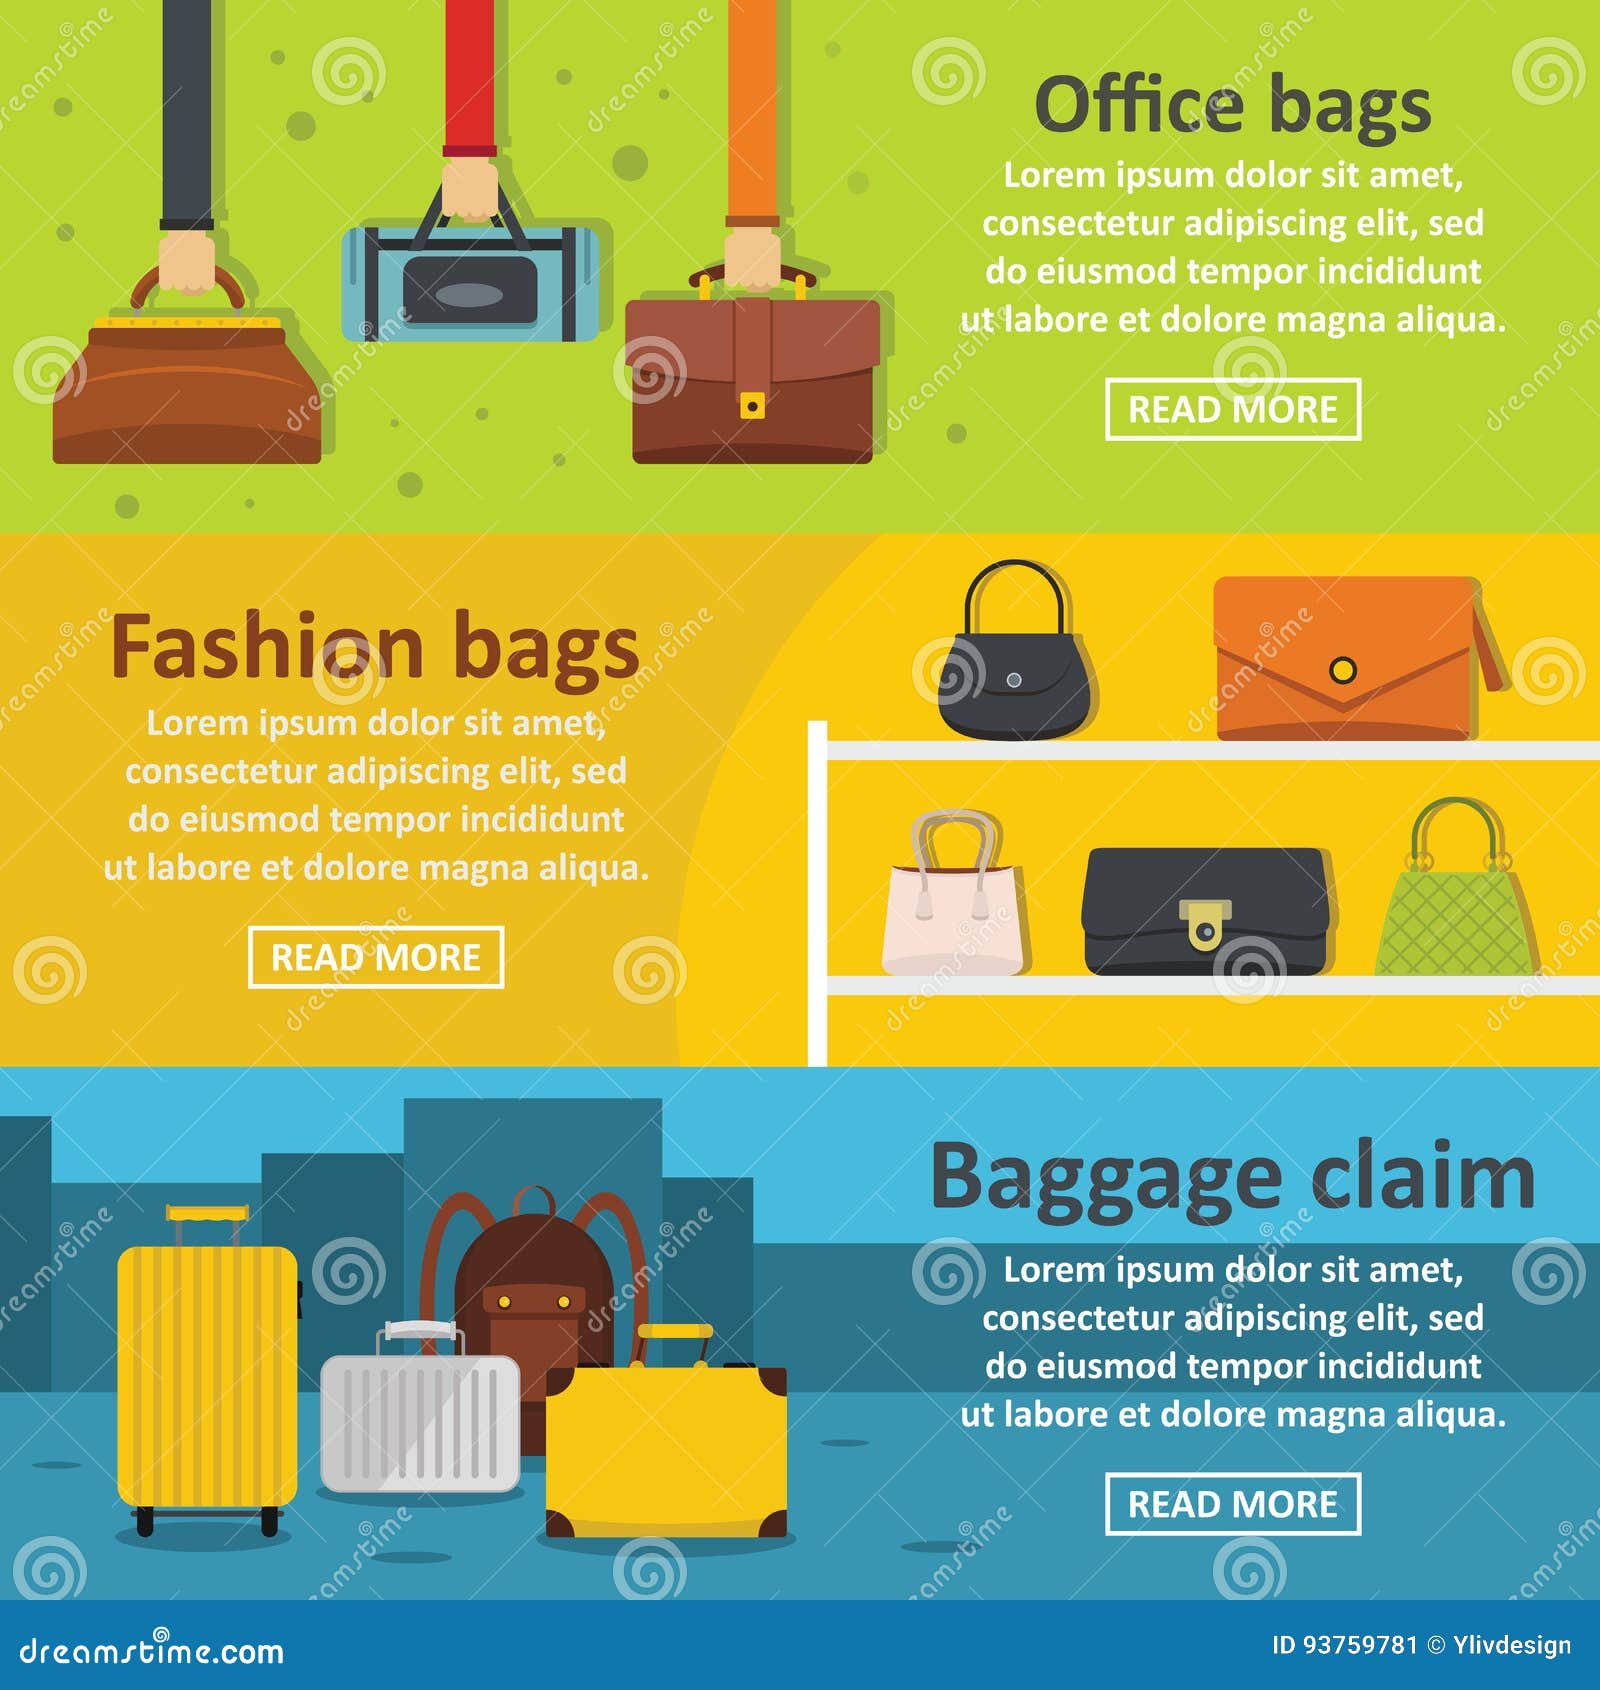 10 packing hacks to keep your suitcase in check